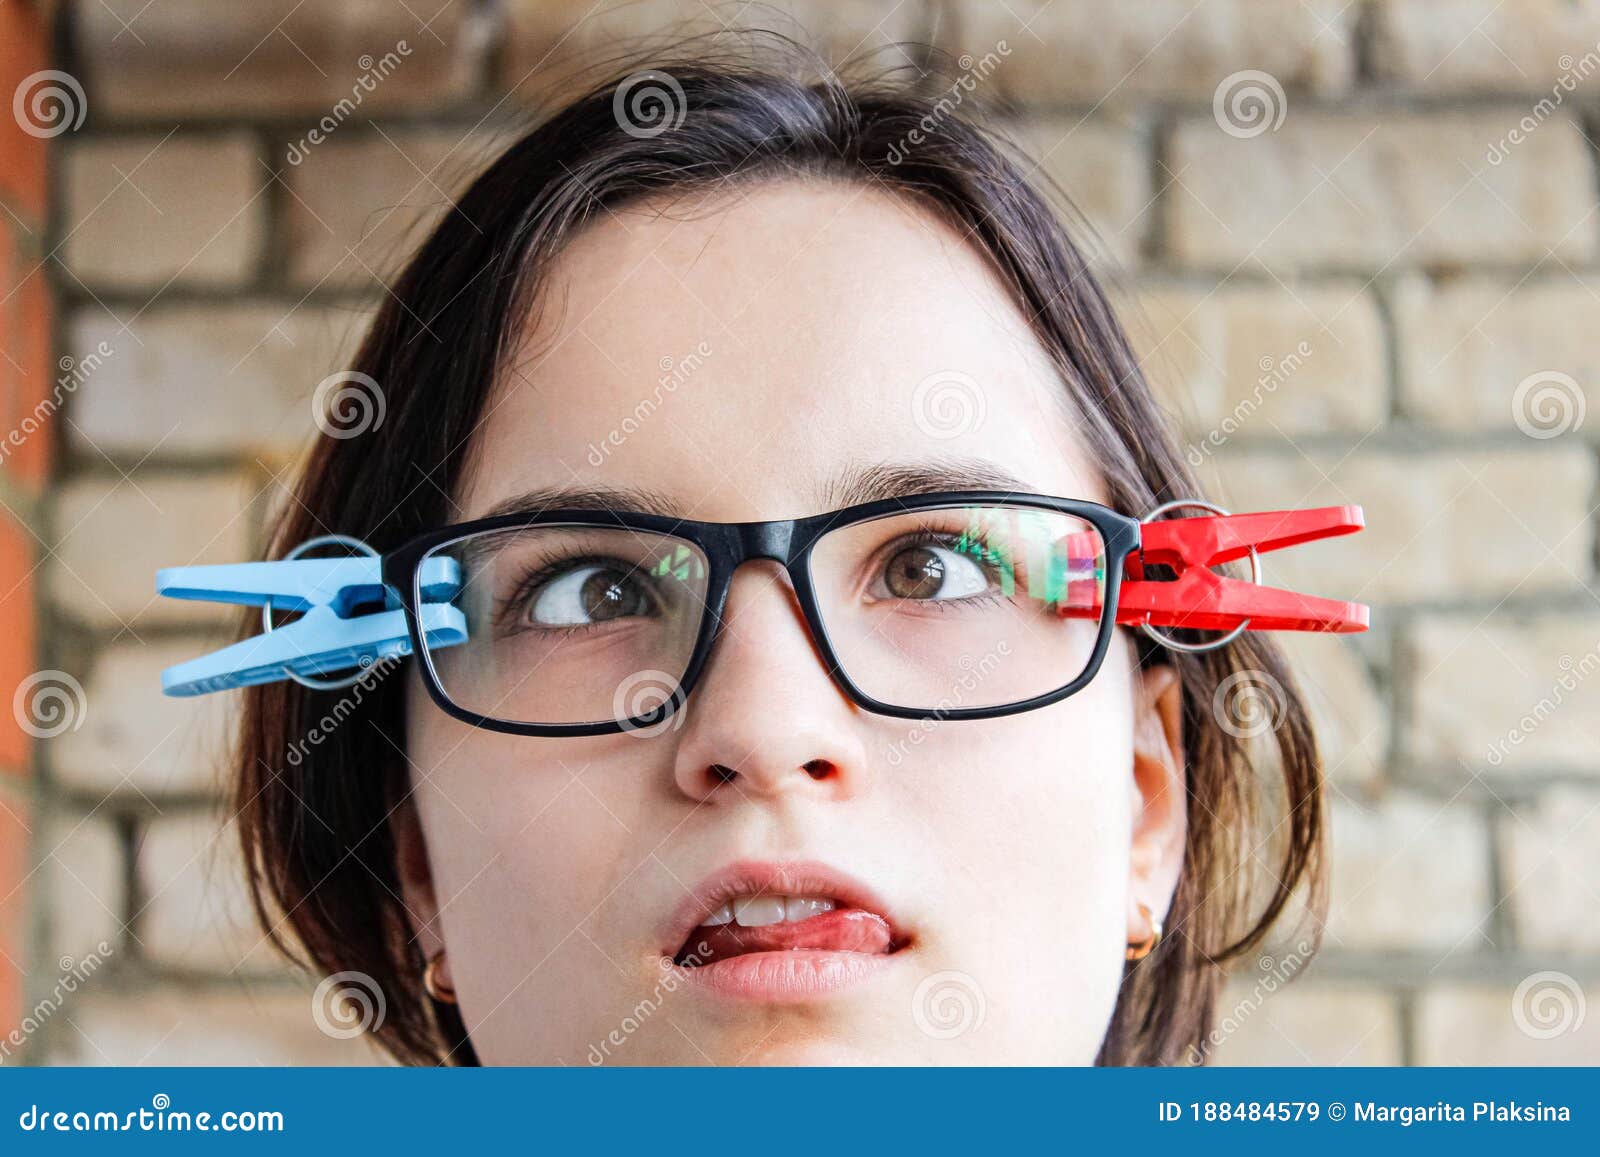 A Girl With Glasses With Slanted Eyes And Clothespins Attached To Her 